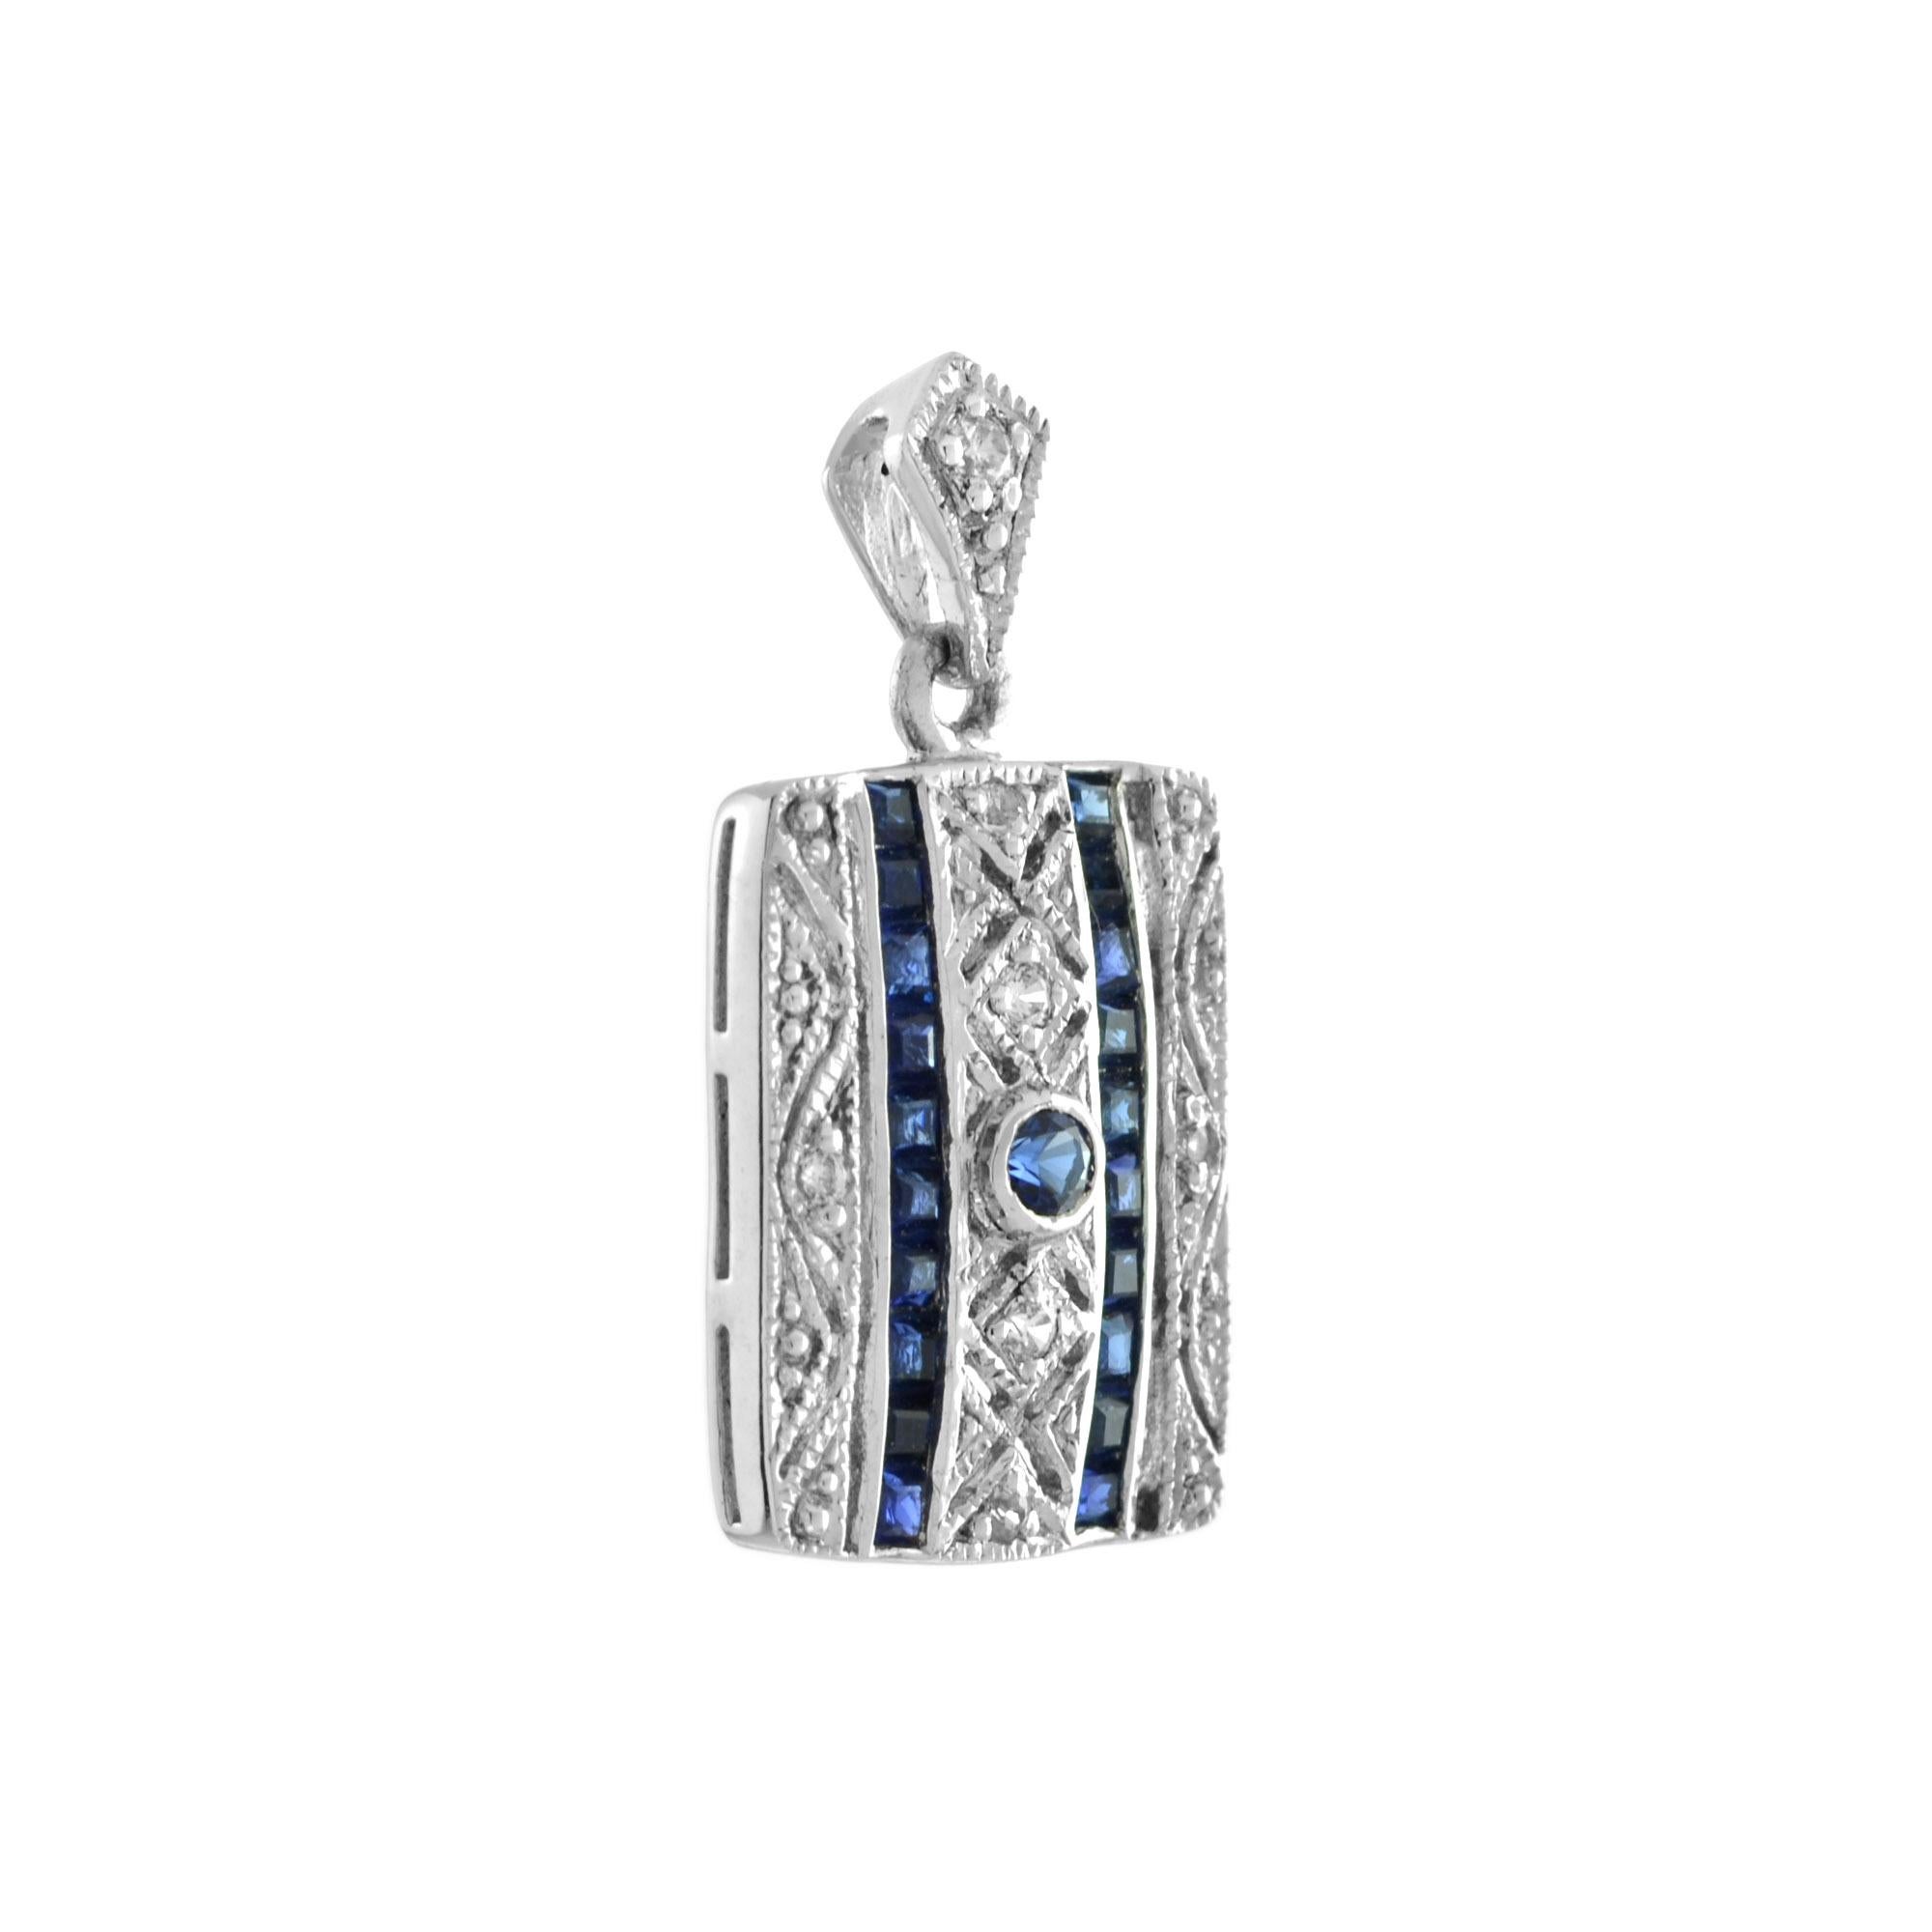 A beautiful Art Deco style 14k white gold millgrain and open work square shape pendant featuring a round and 30 French cut sapphires with total of 0.14 carats diamonds. This simple and classic pendant is perfect to wear anytime.

Information
Metal: